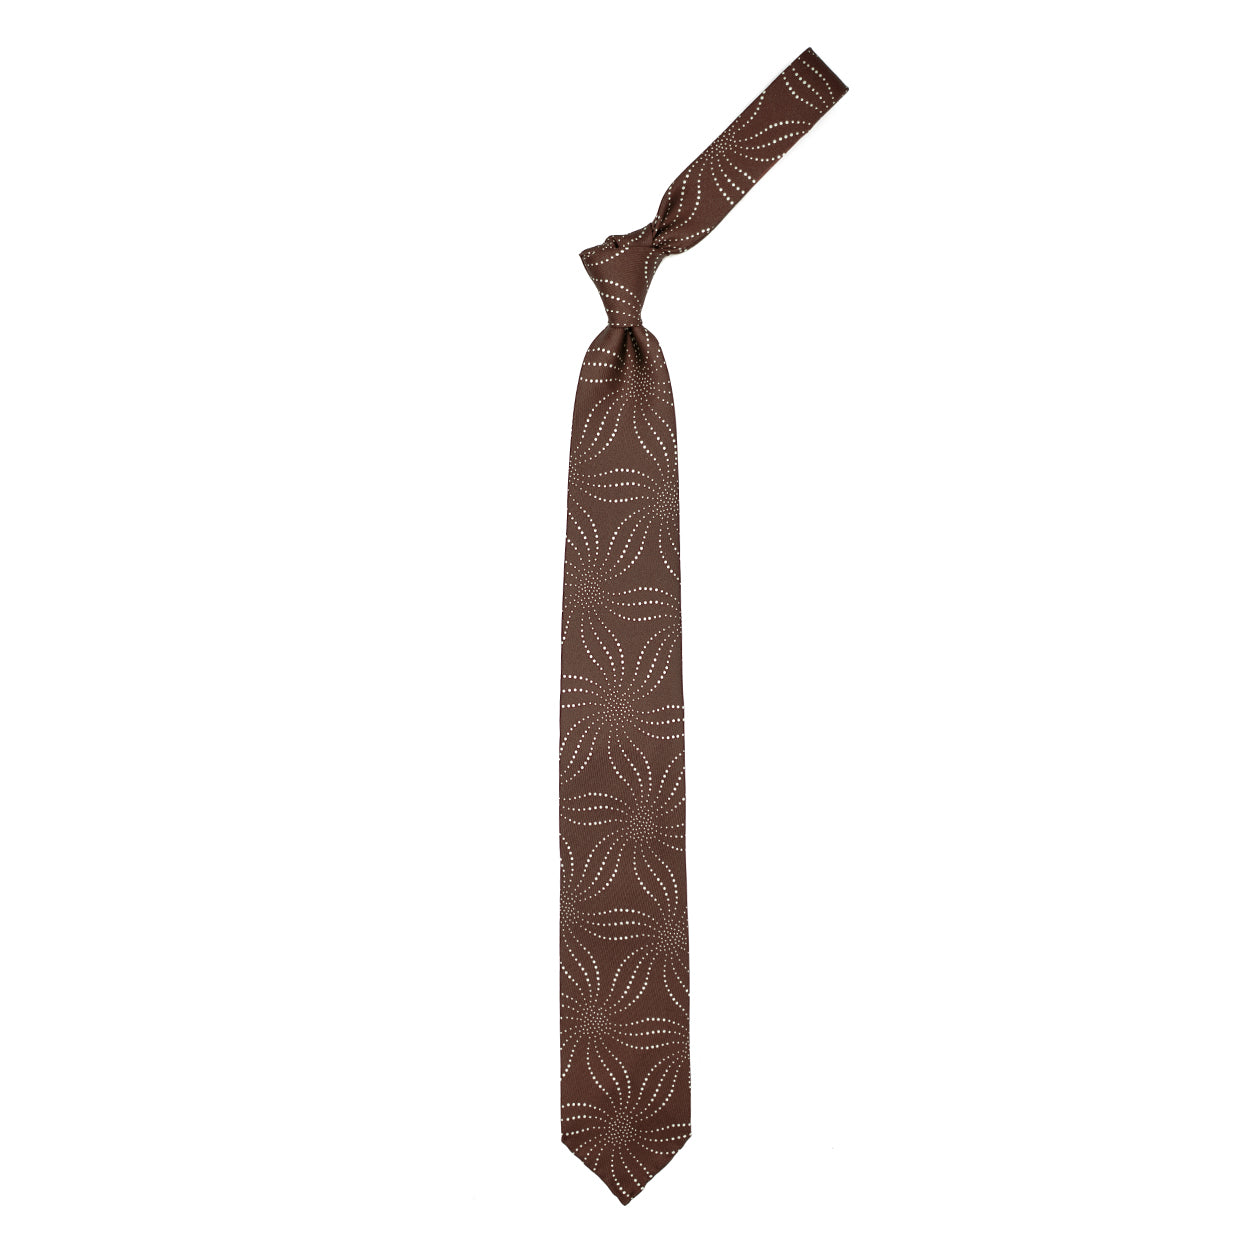 Brown tie with beige abstract design